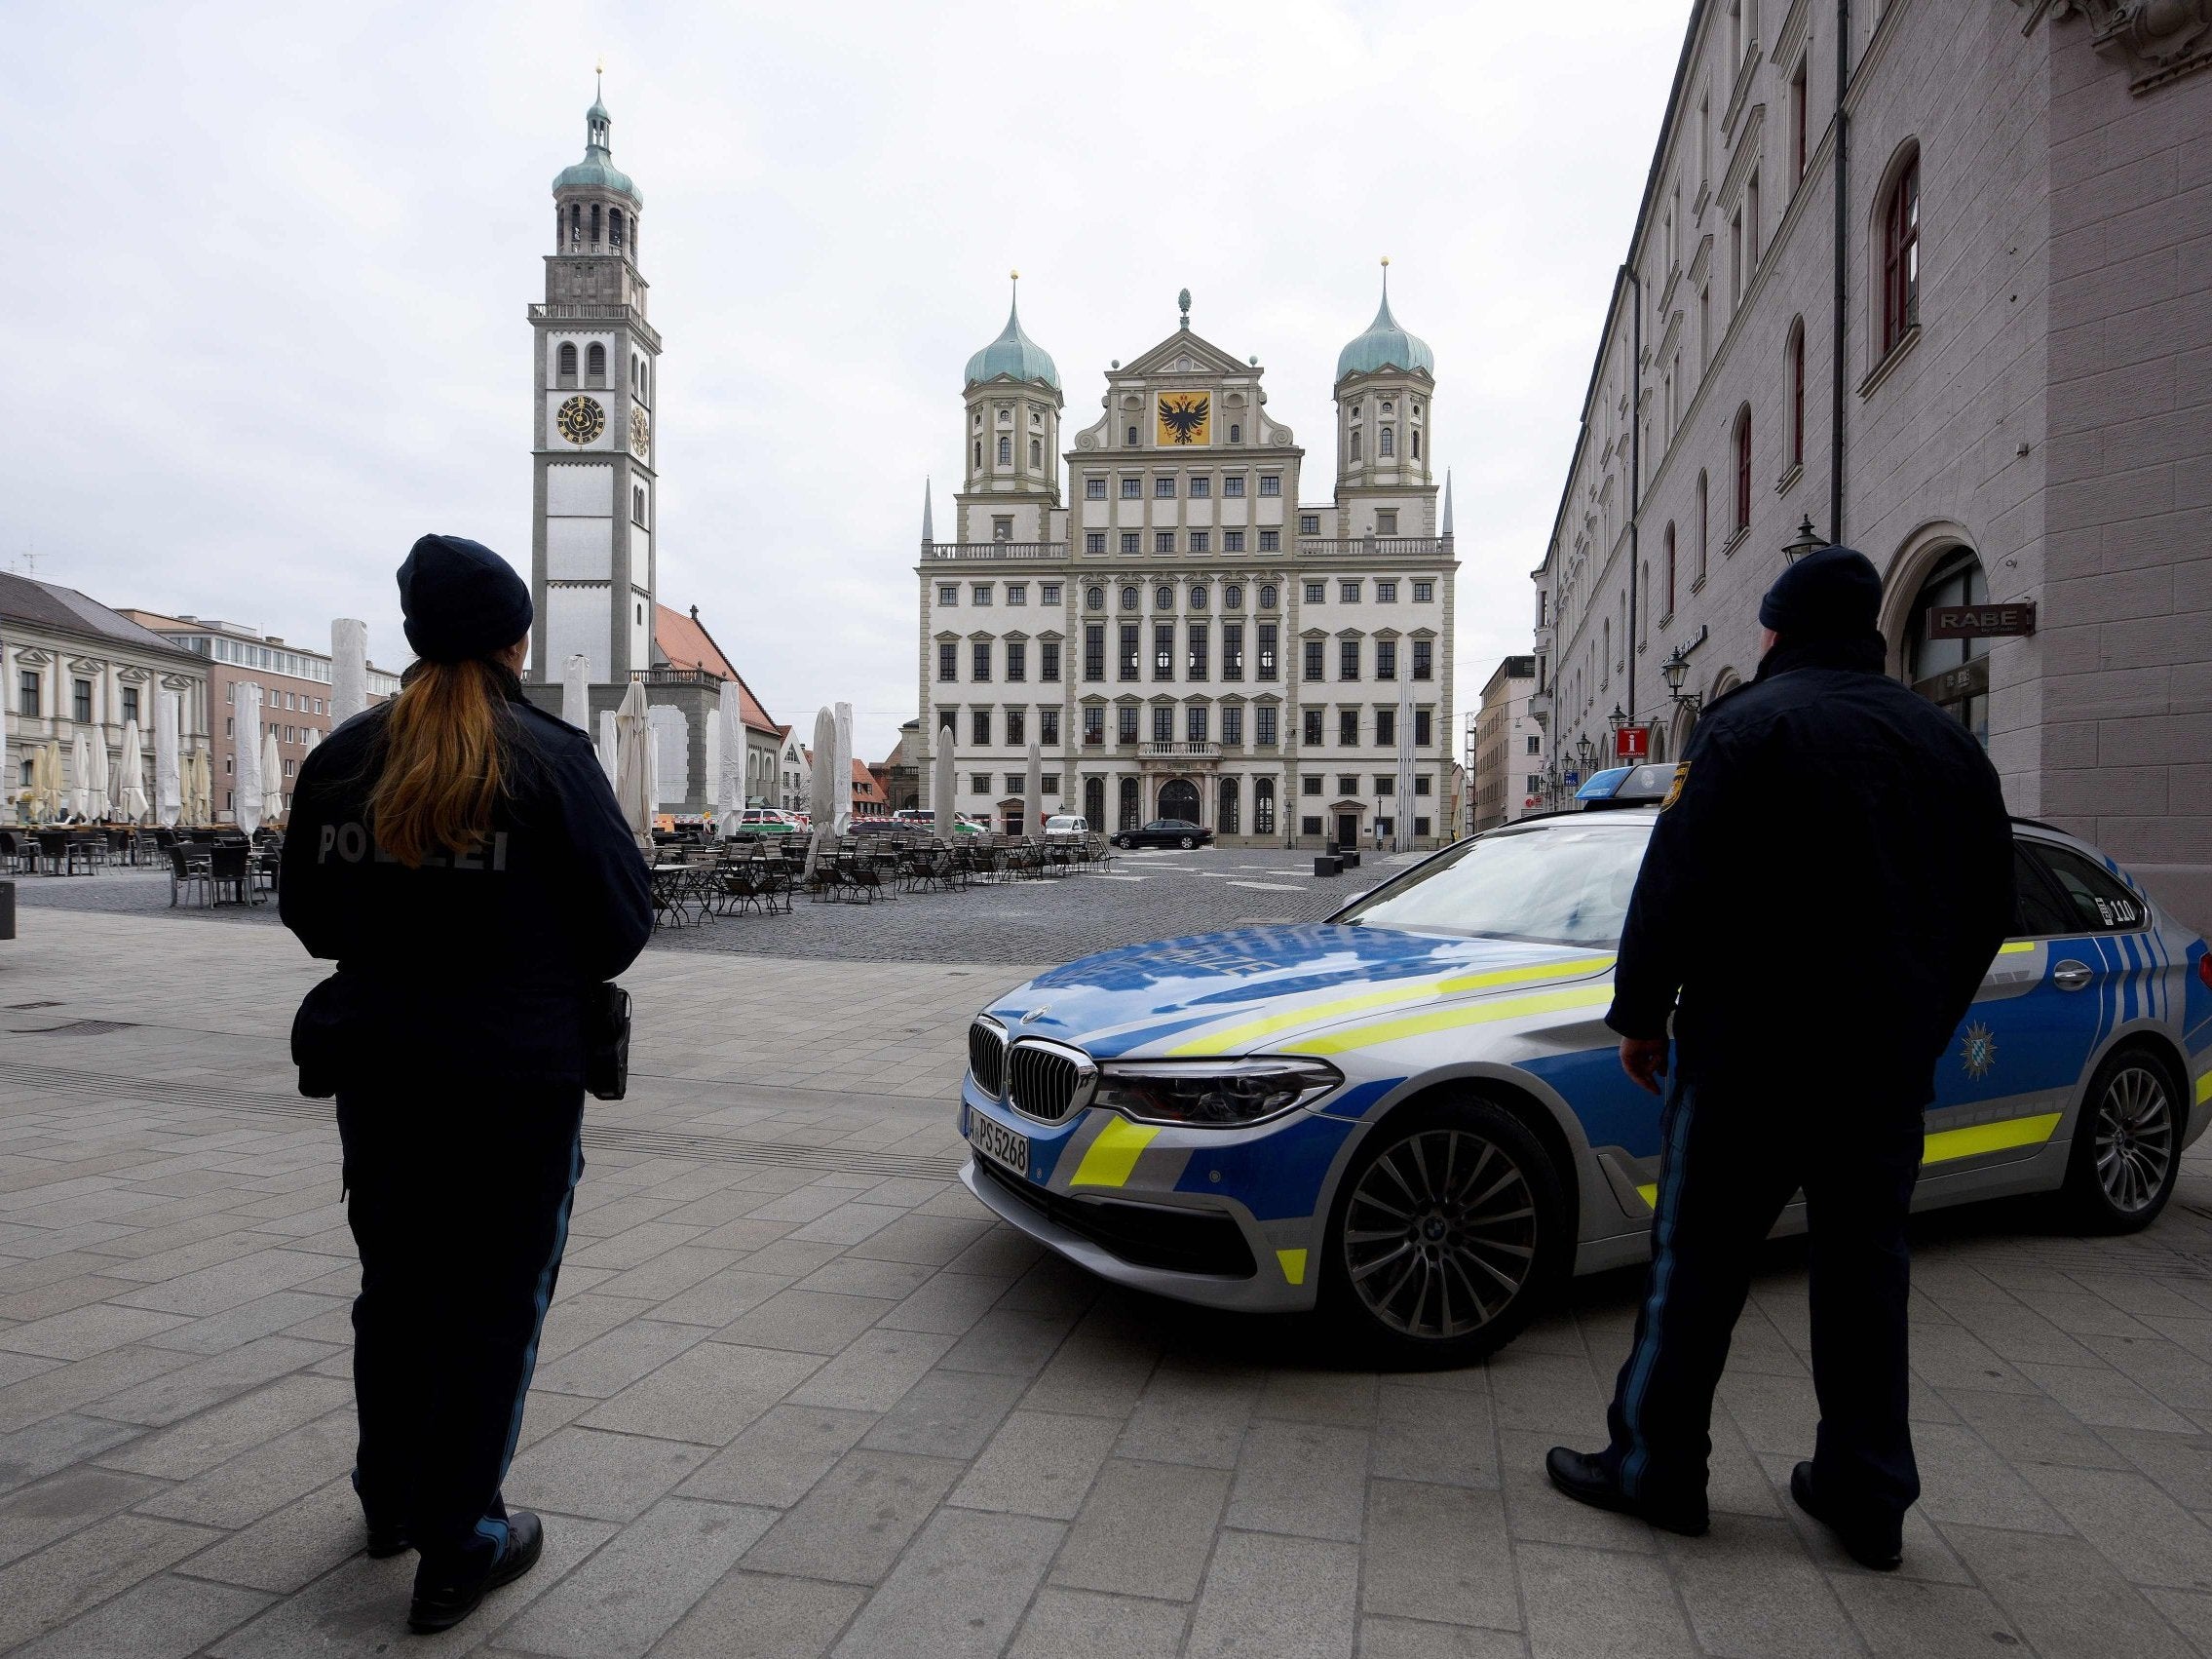 Policemen secure the square in front of the city hall of Augsburg, southern Germany